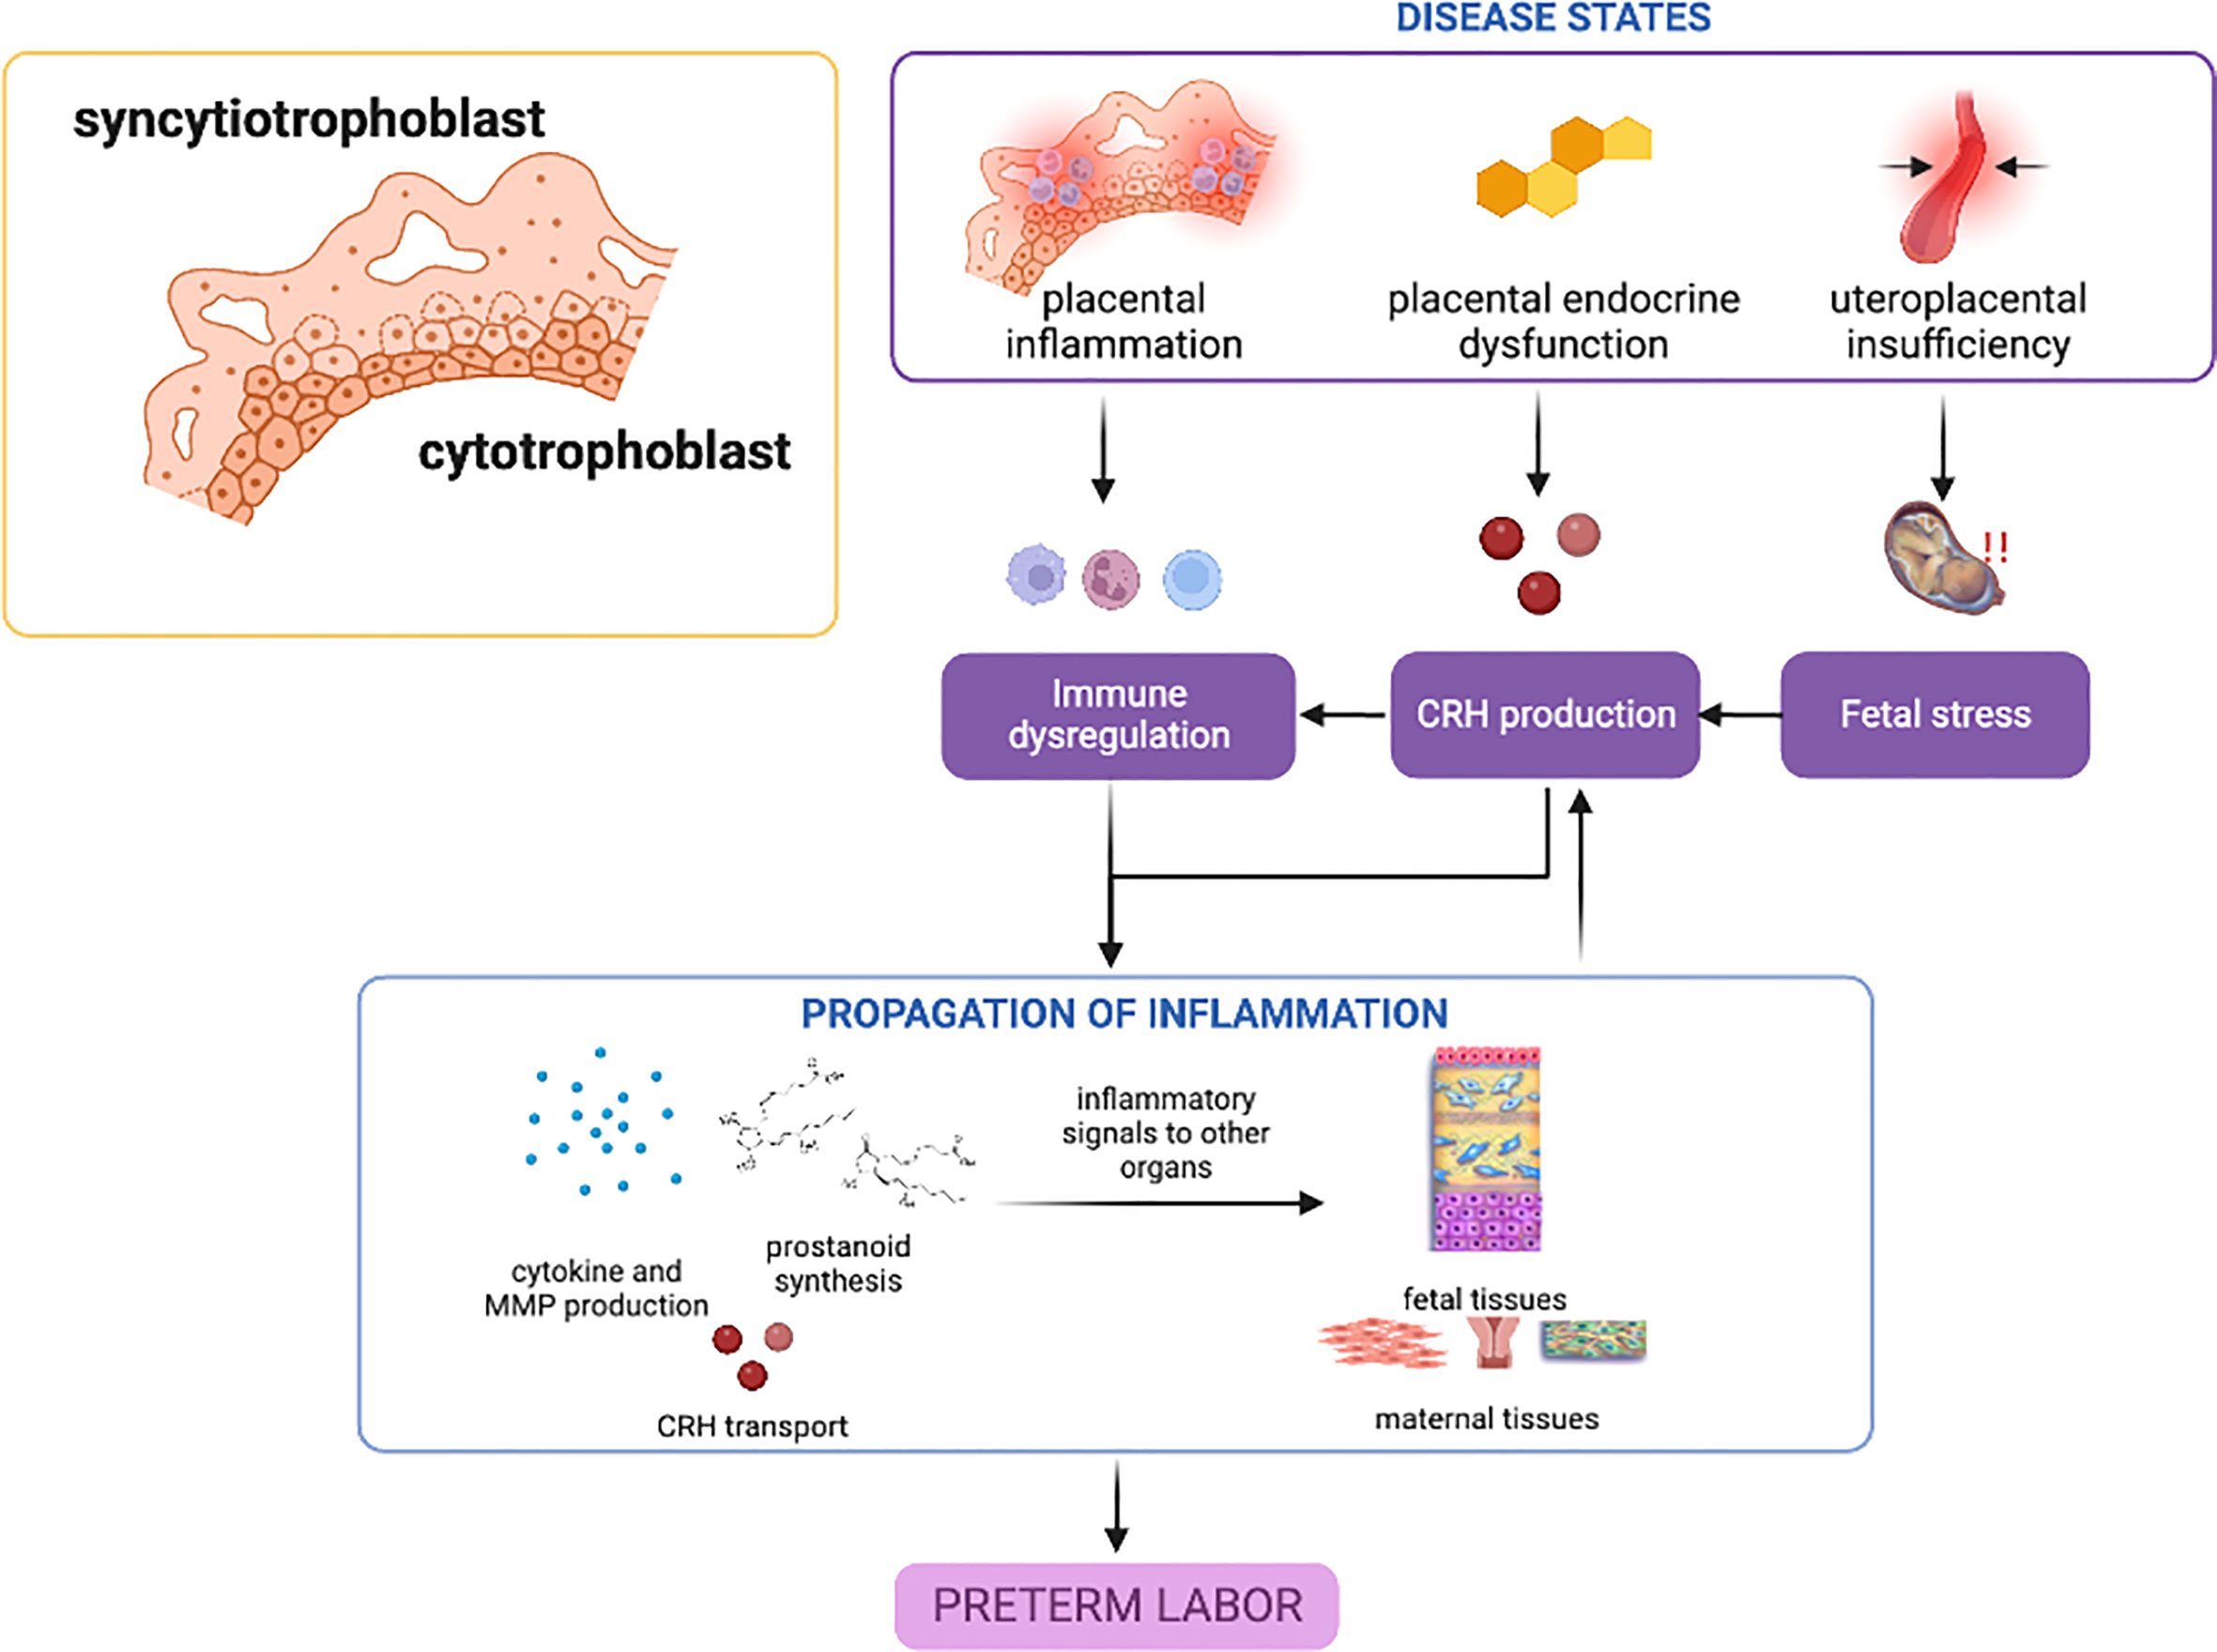 Frontiers  Spontaneous preterm birth: Involvement of multiple  feto-maternal tissues and organ systems, differing mechanisms, and pathways